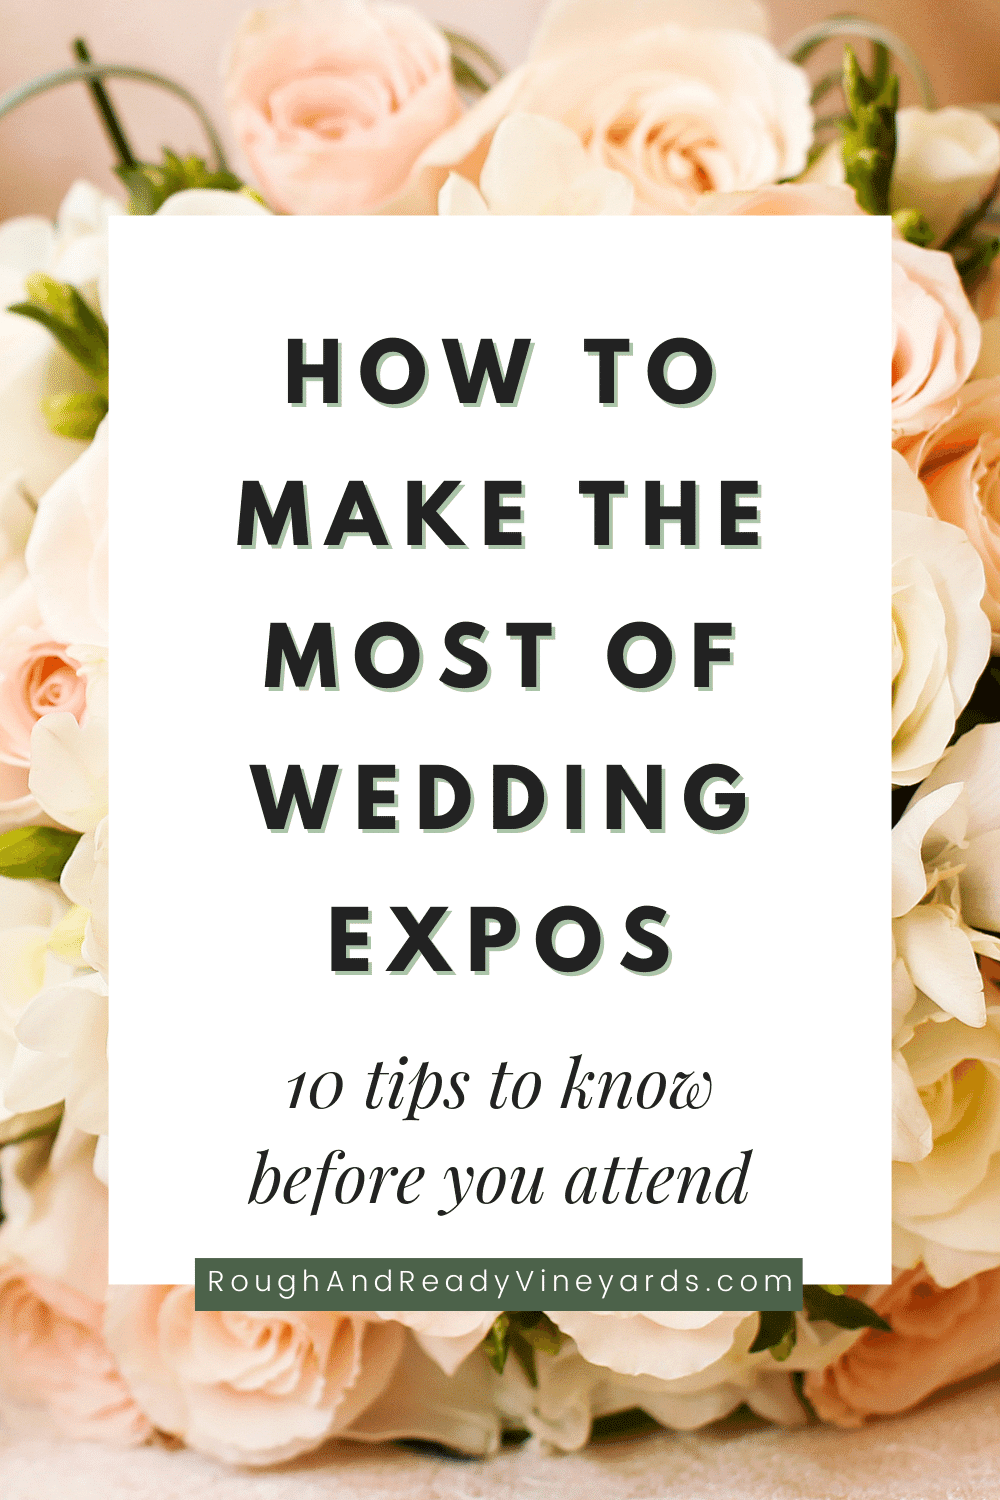 Pinterest pin about How to Make the Most of Wedding Expos